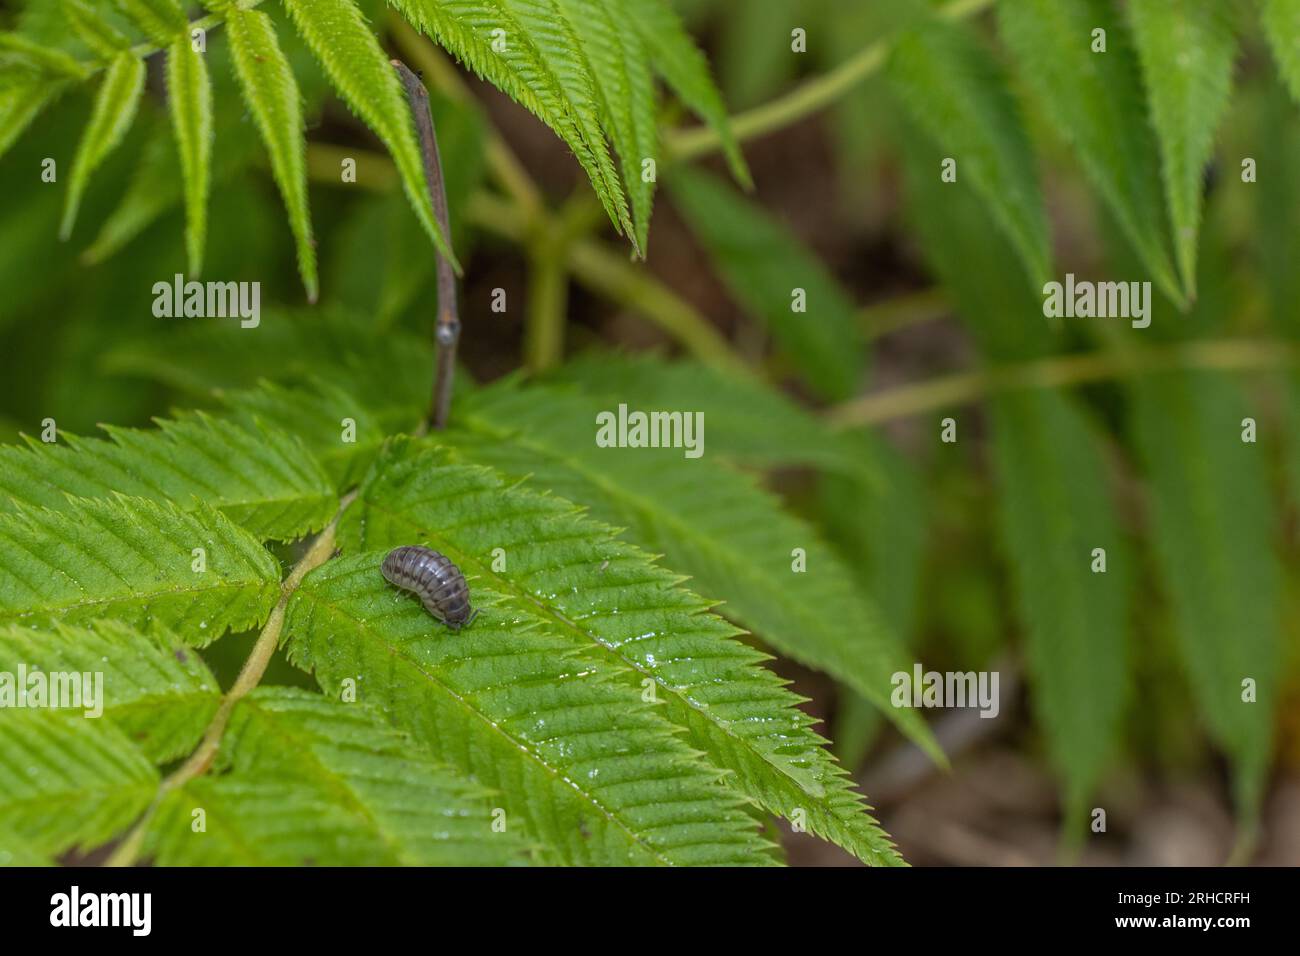 Pill bug on green leaf - blurred background Stock Photo